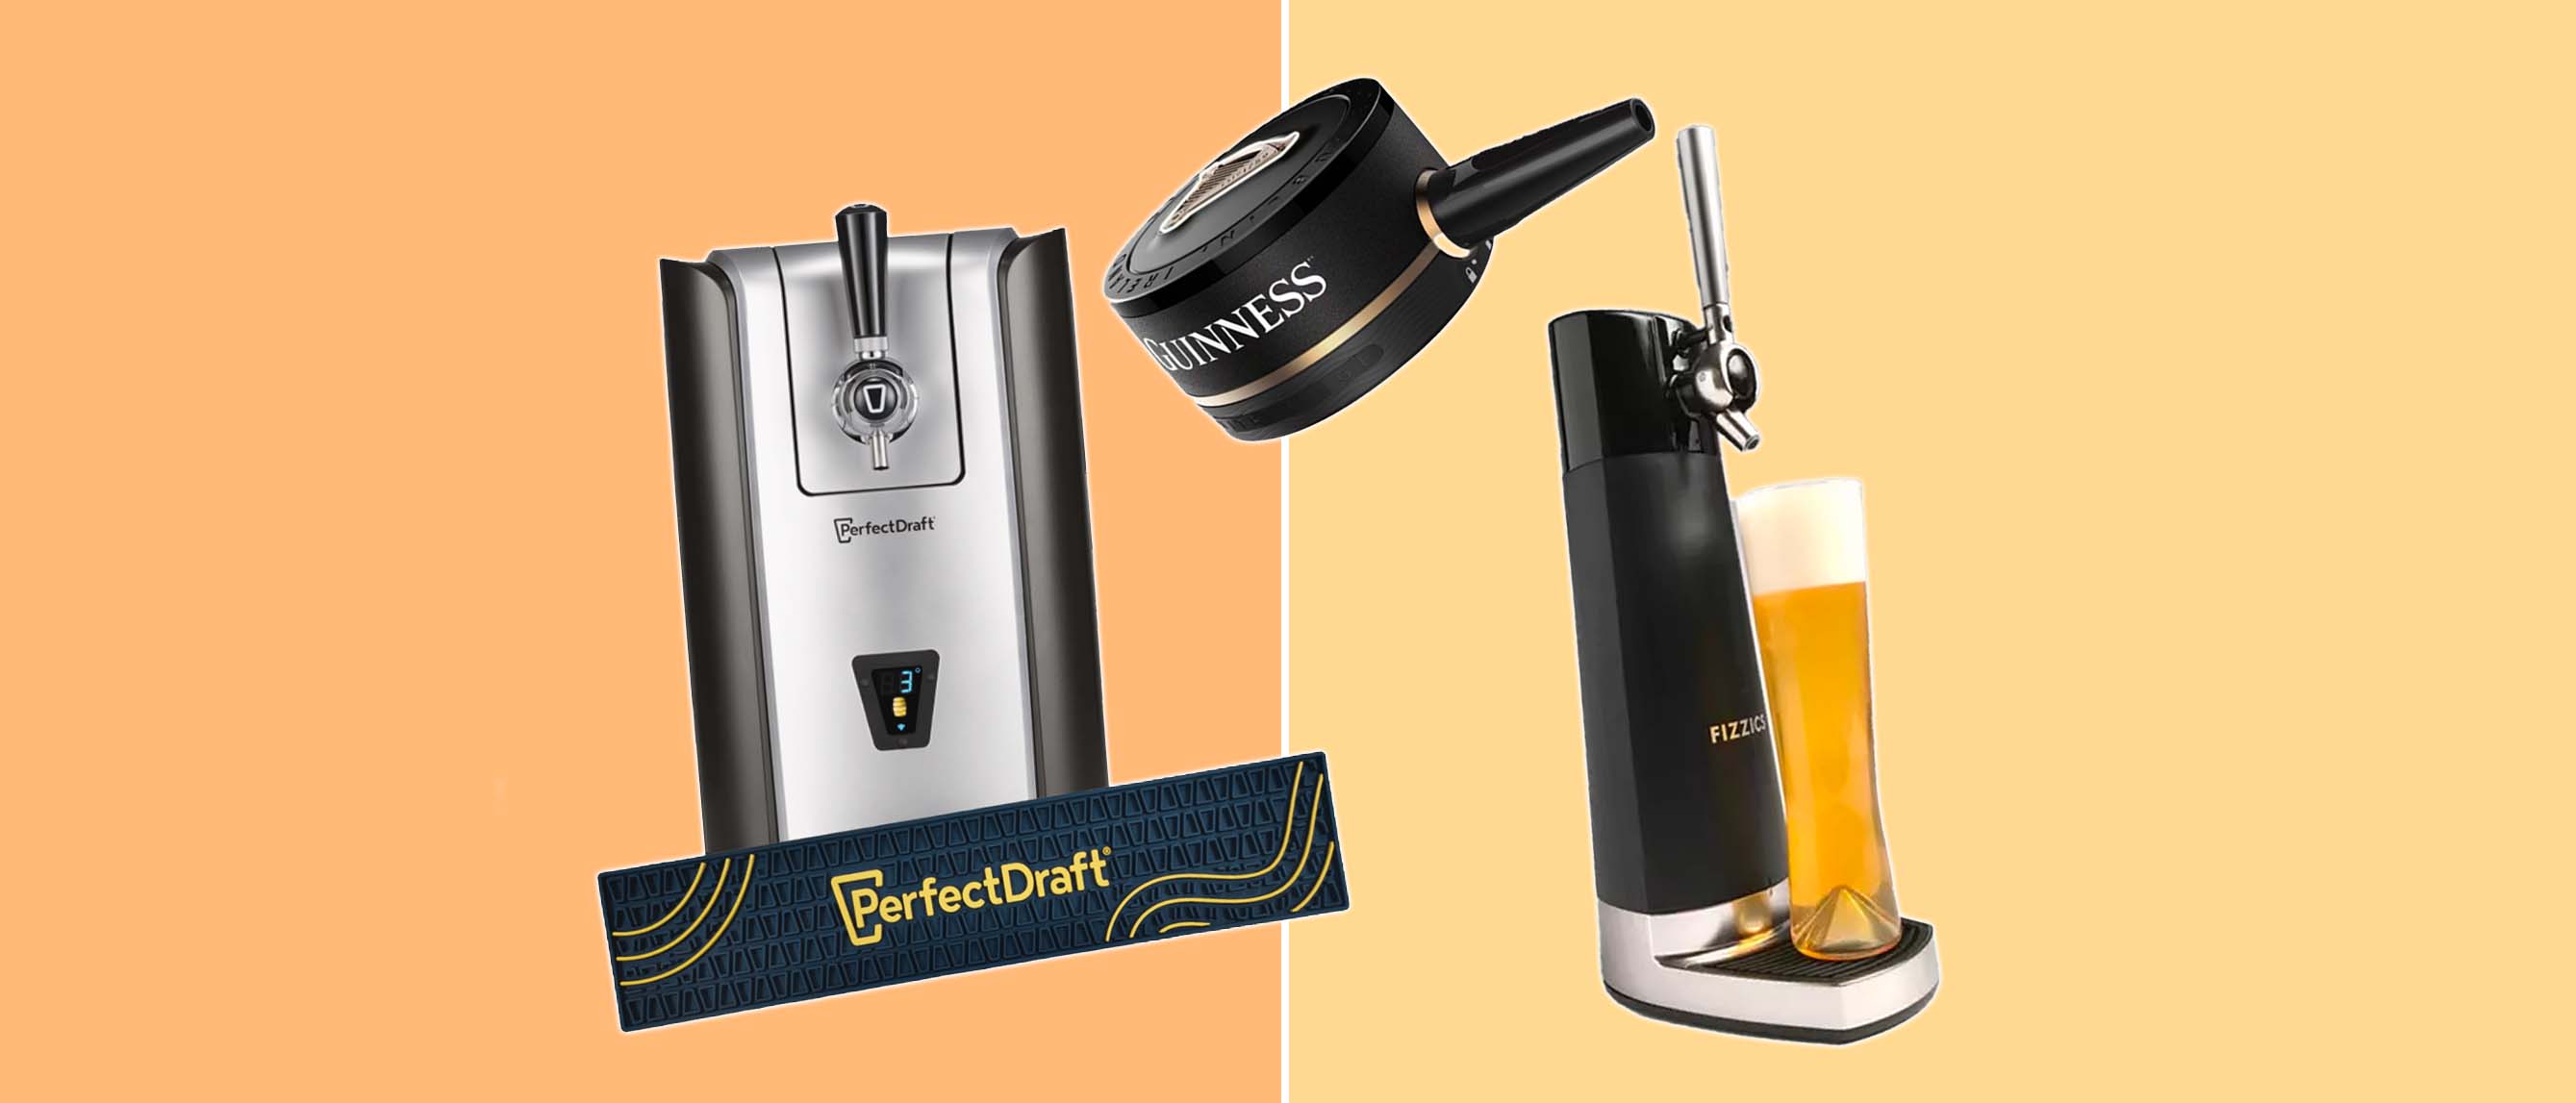 Philips PerfectDraft Review: Pub perfect pints at home